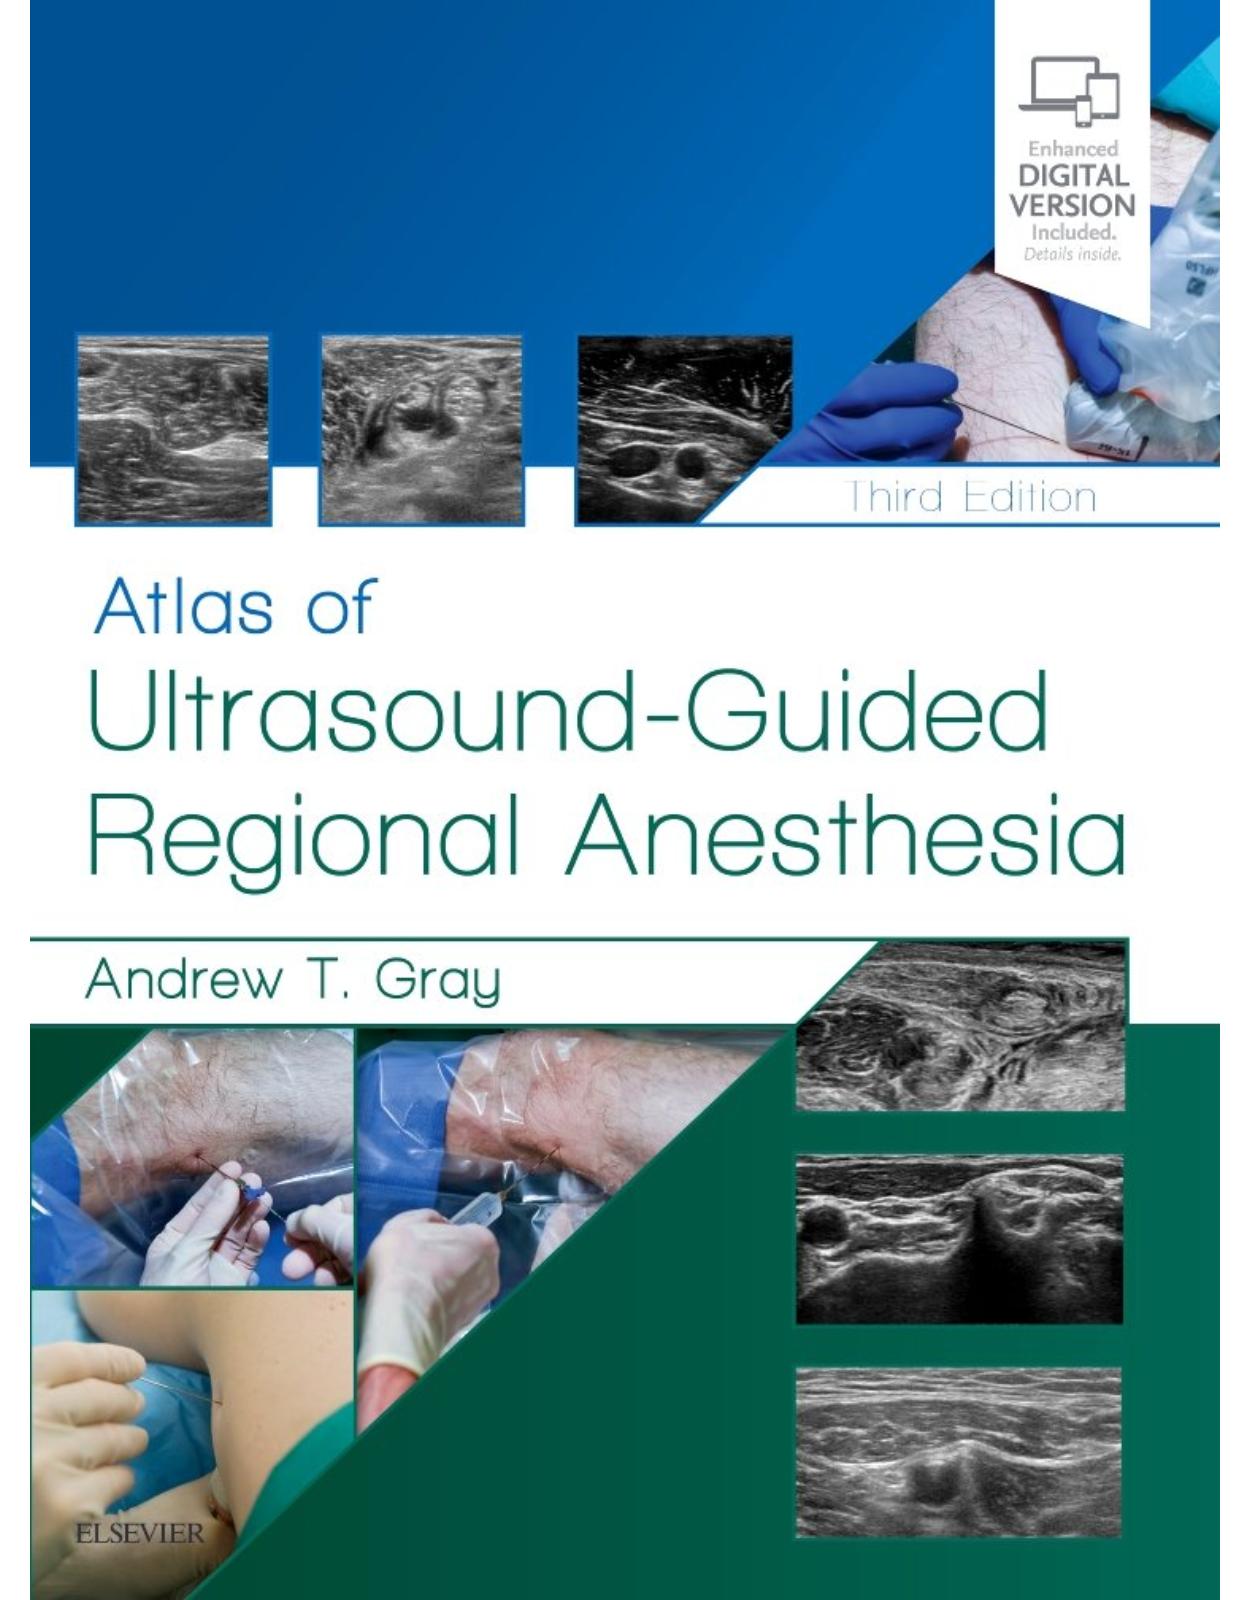 Atlas of Ultrasound-Guided Regional Anesthesia, 3e: Expert Consult - Online and Print